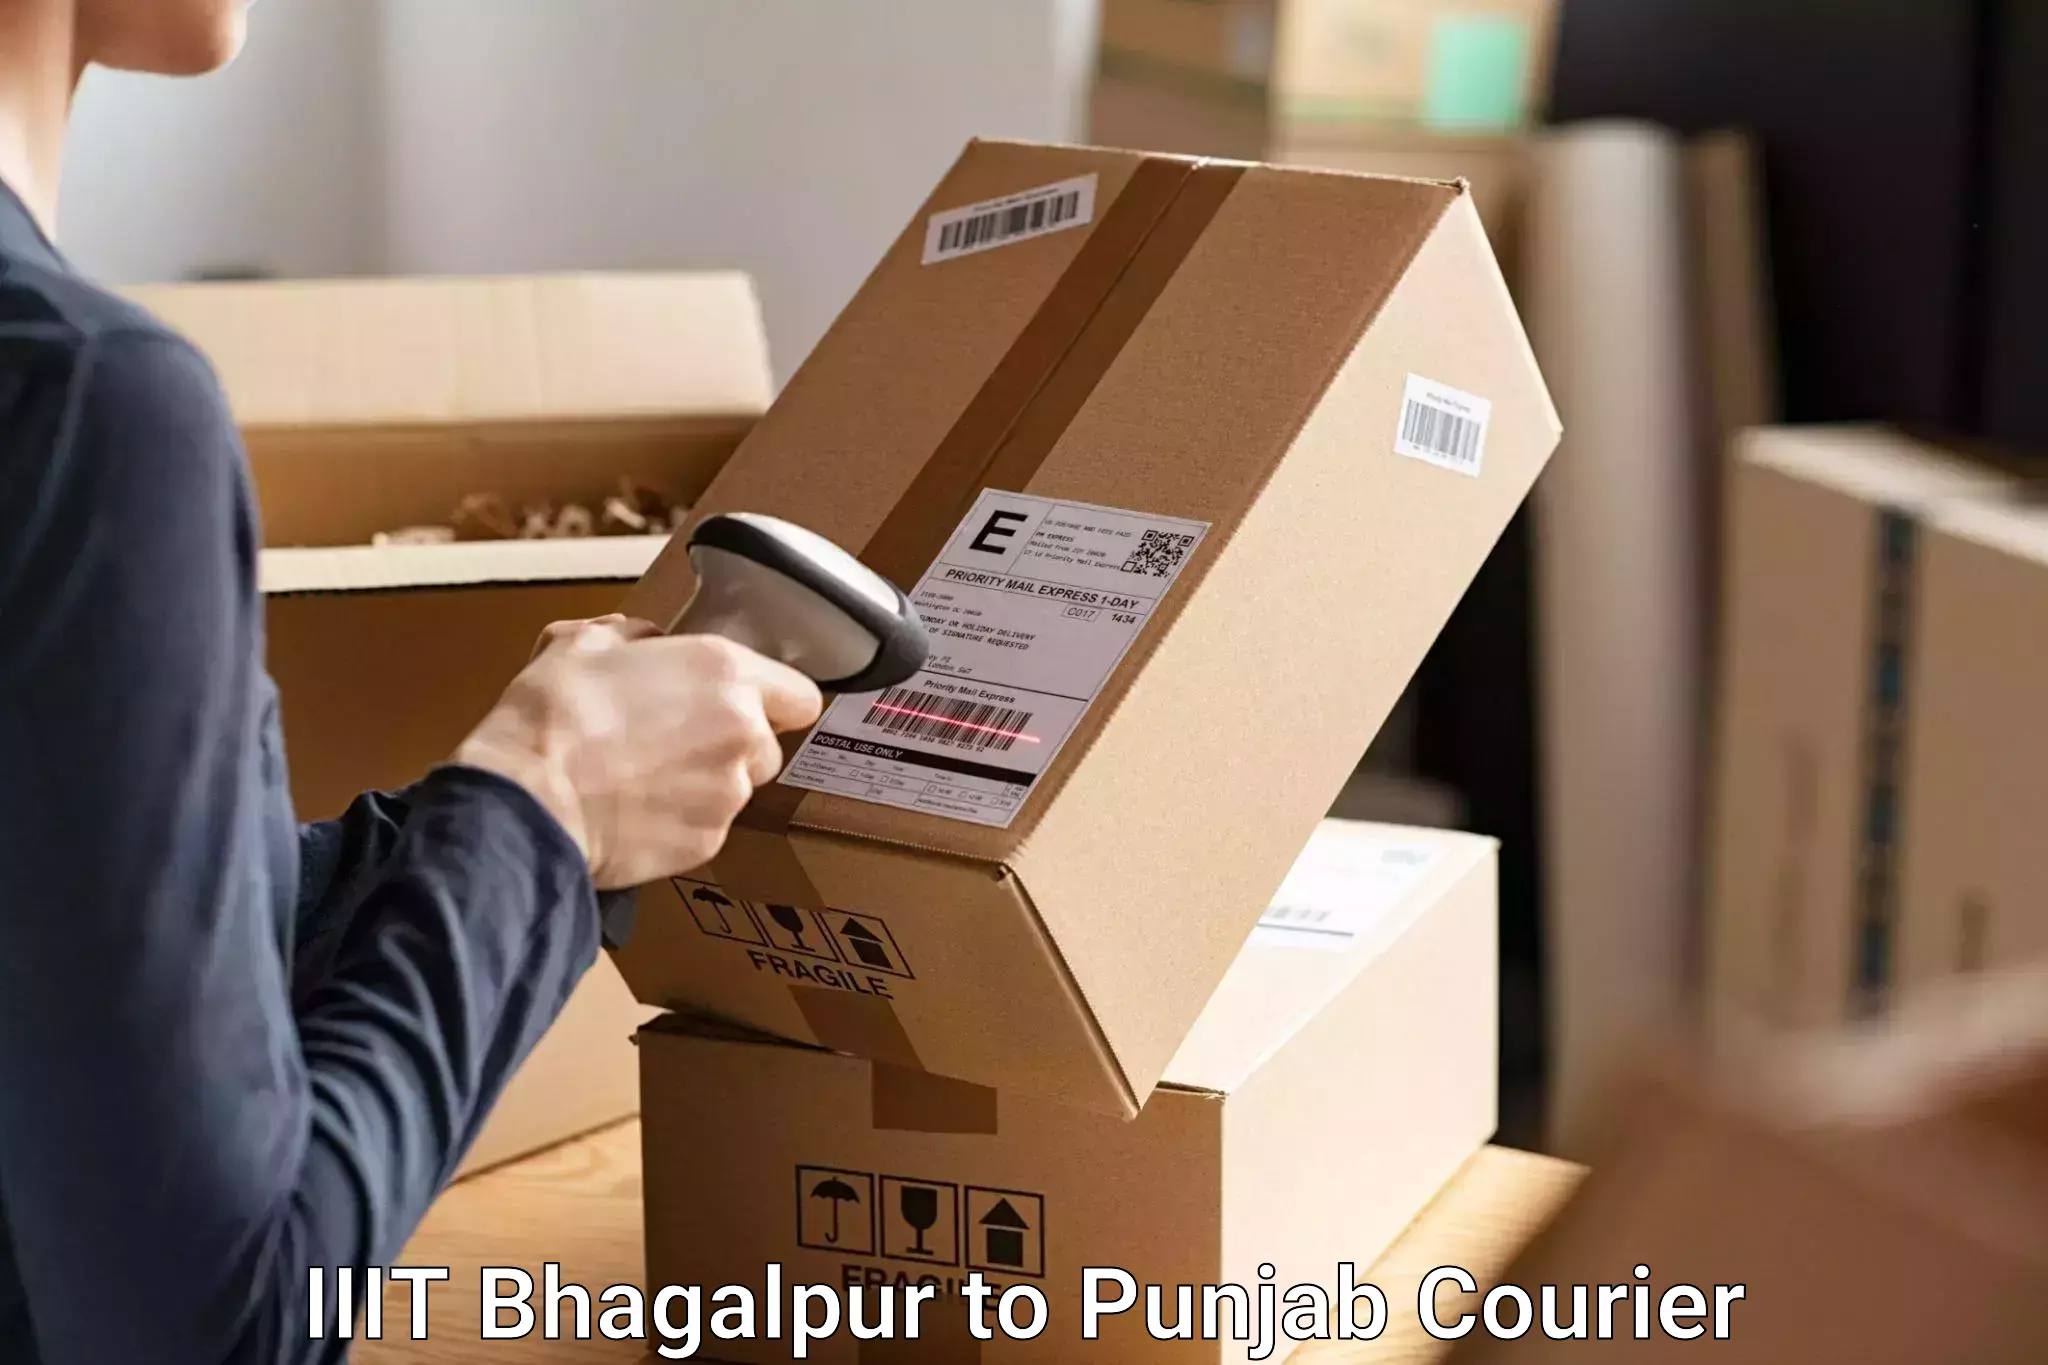 Personal effects shipping IIIT Bhagalpur to Ludhiana